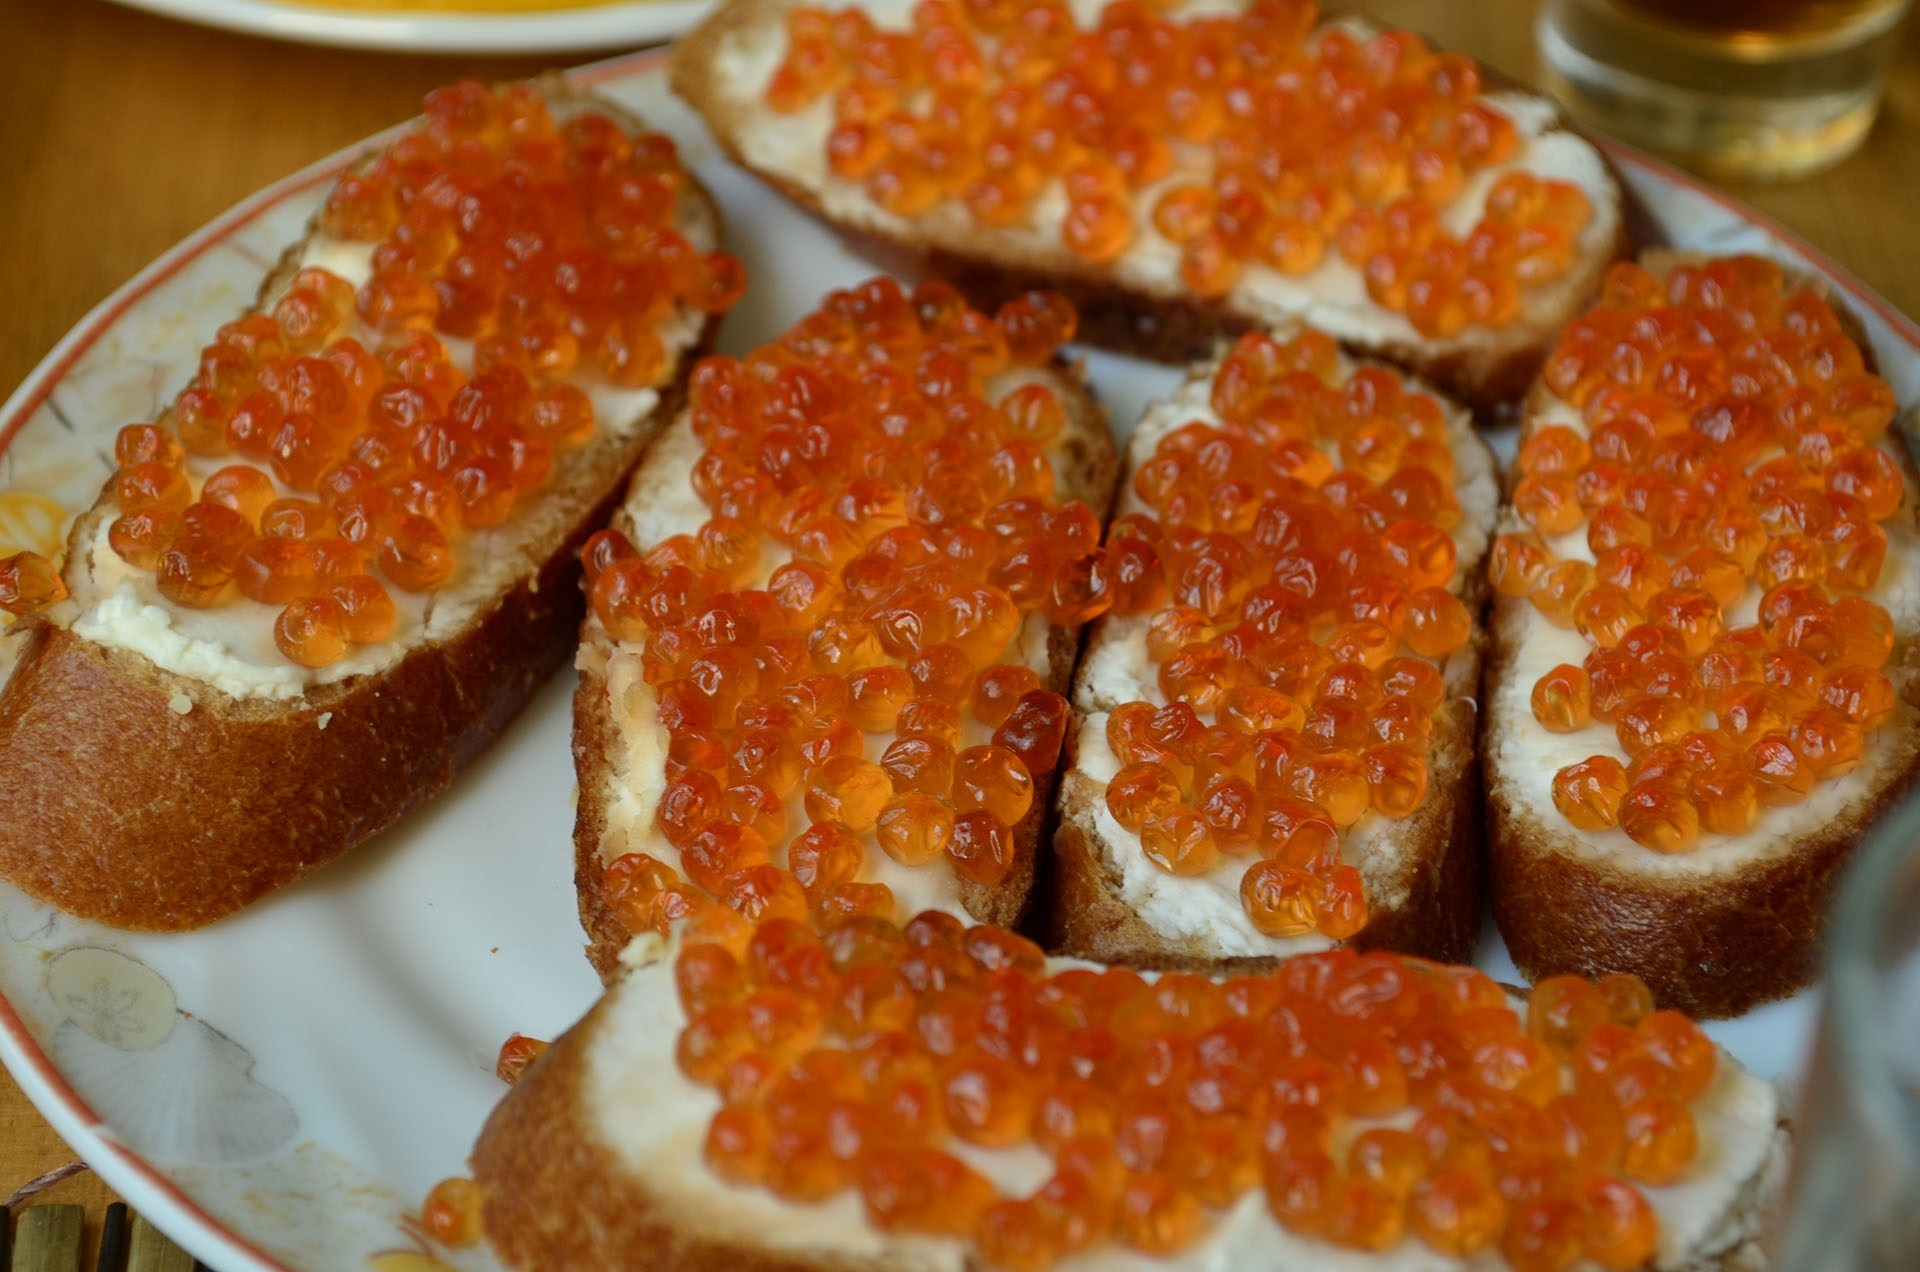 six brown and white breads with orange toppings